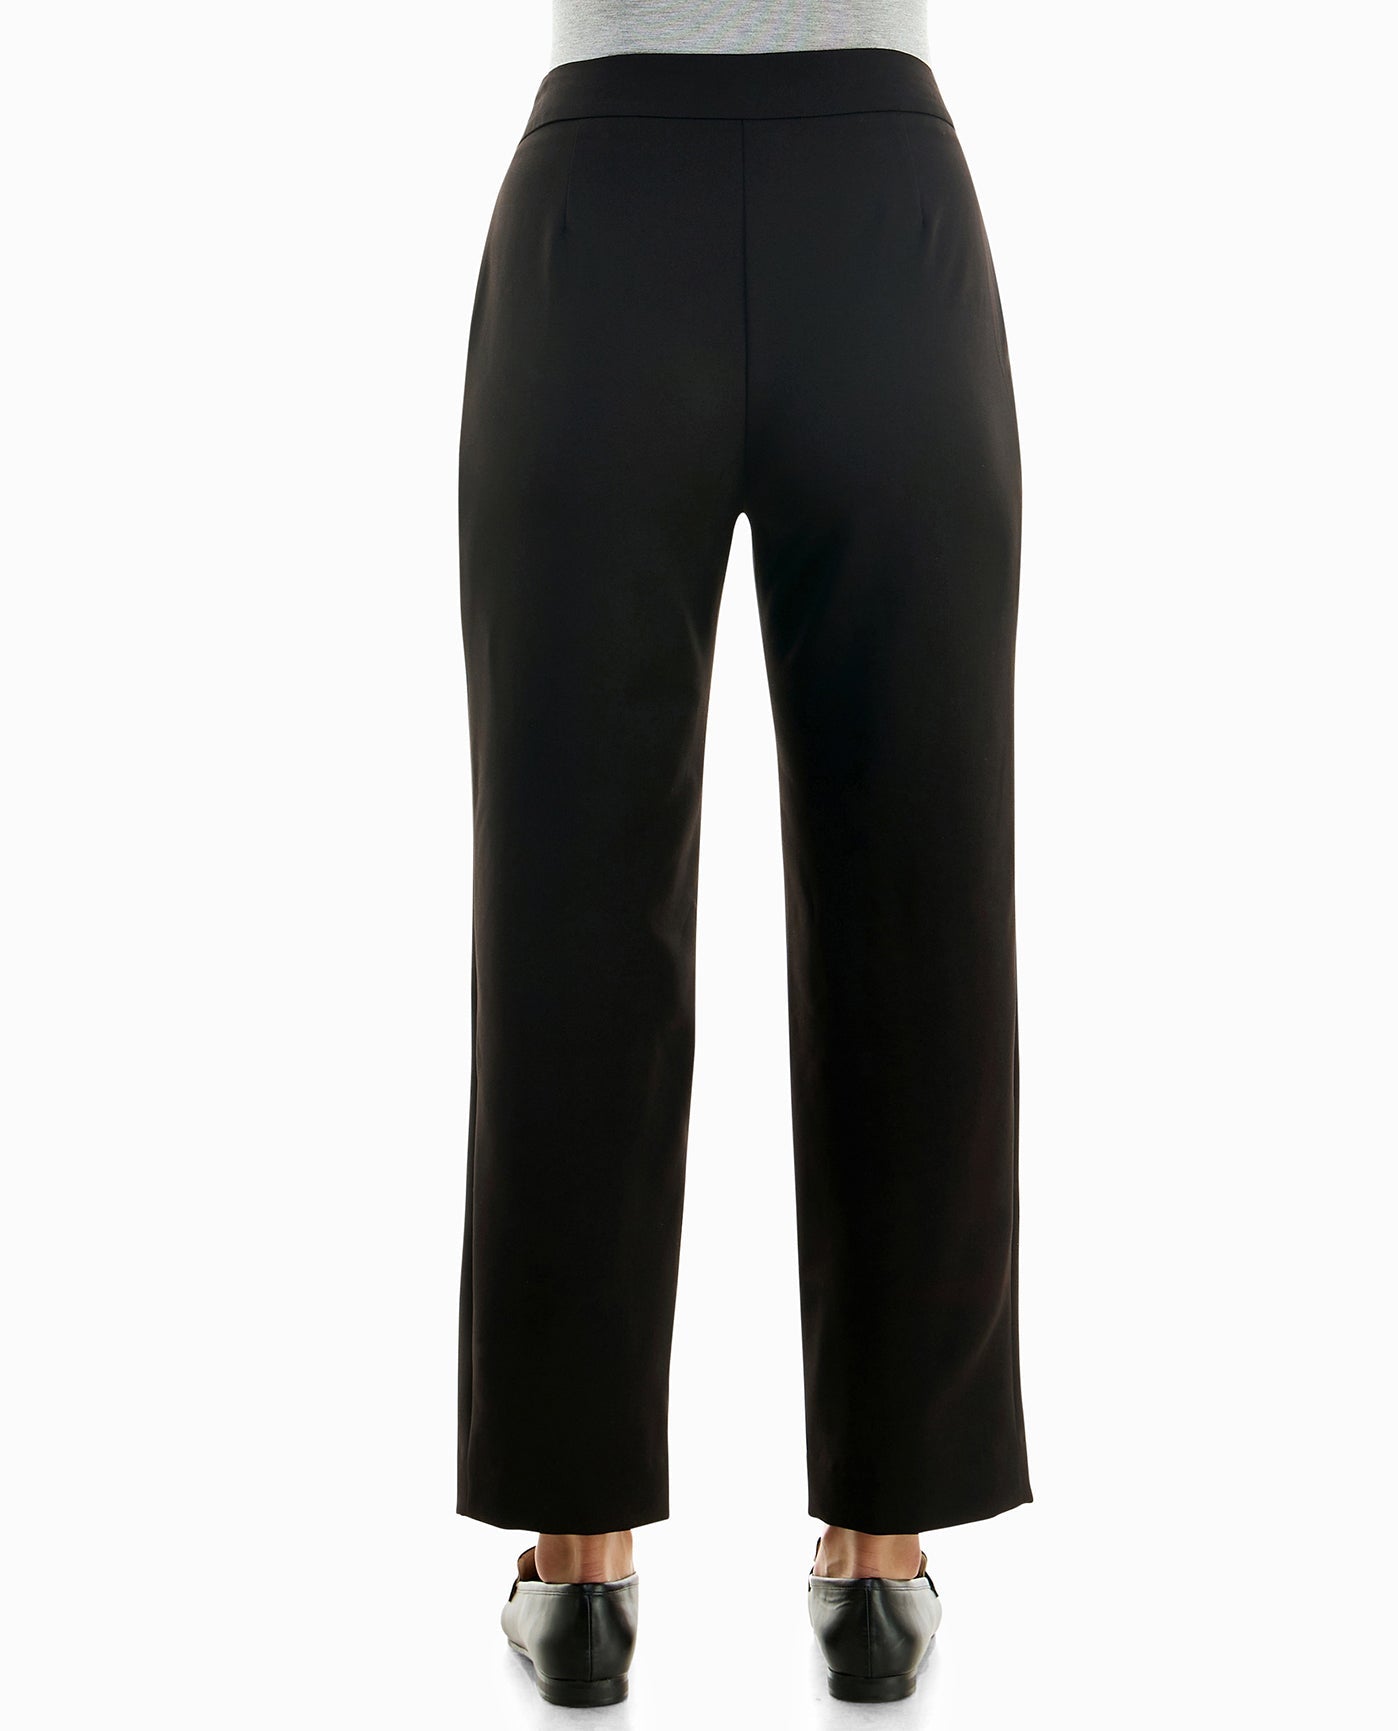 Black high waisted pleated stretch Trousers